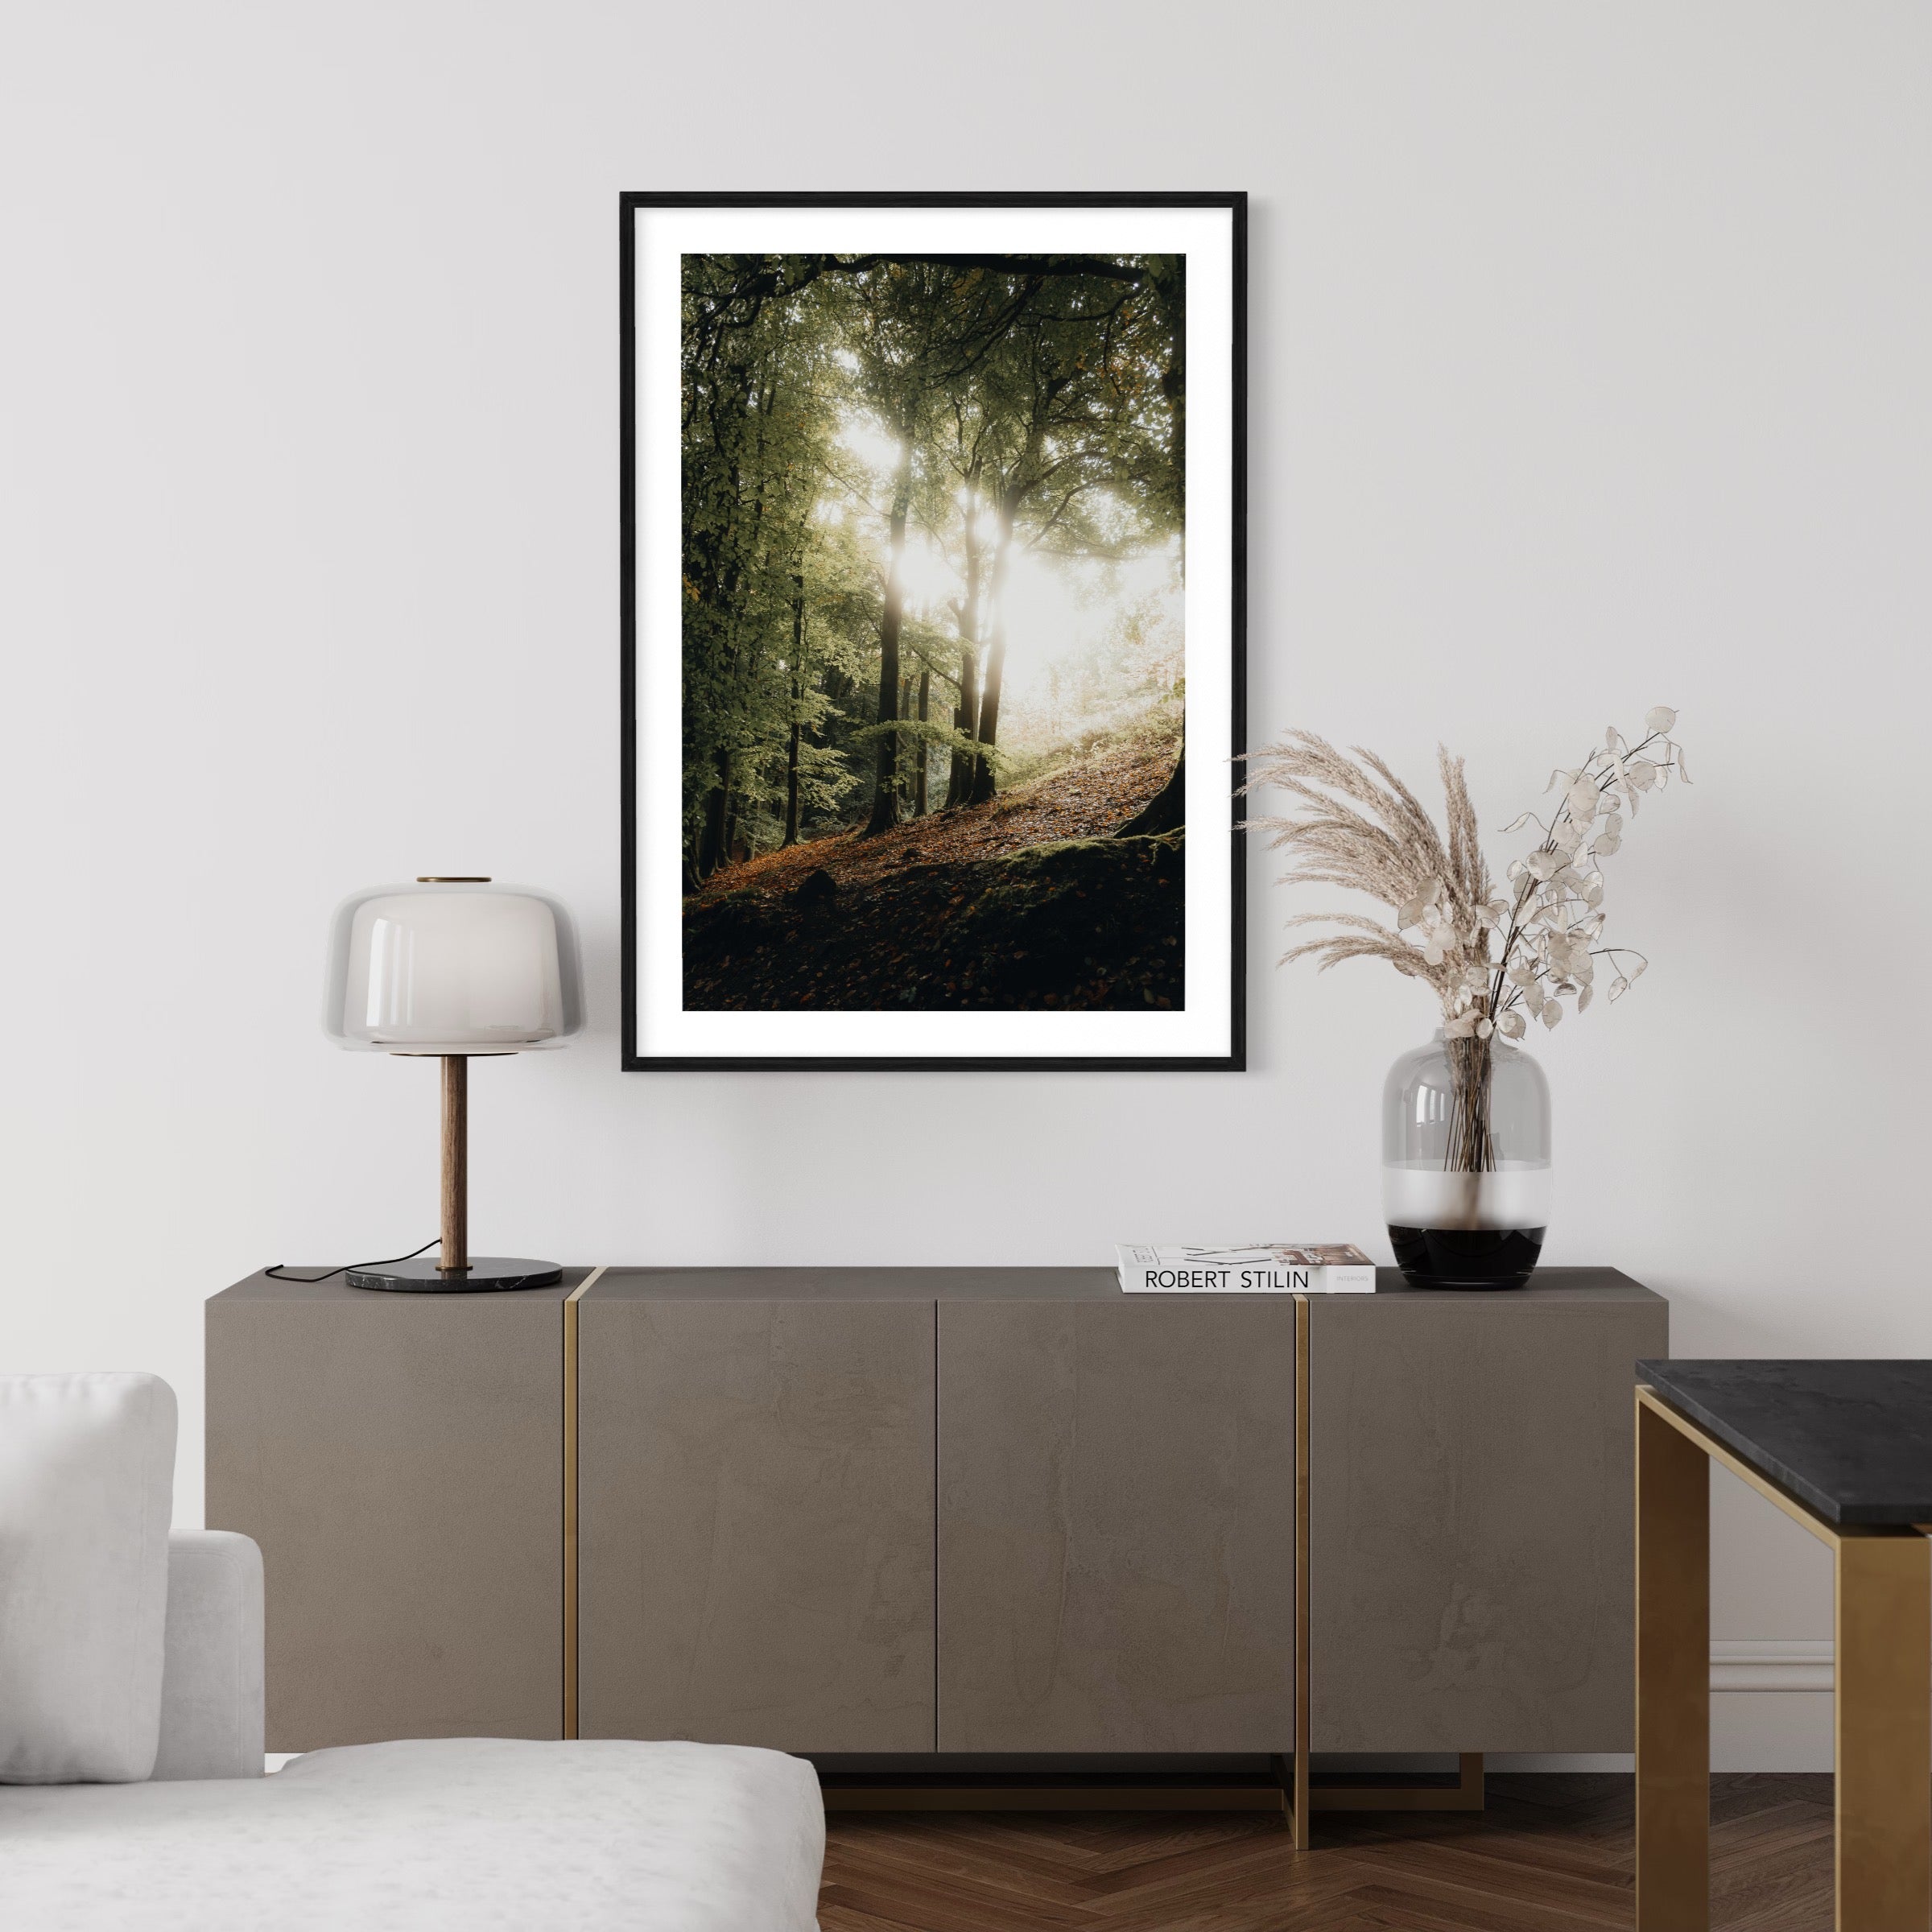 Wall art print of the sunrise seeping through trees in a forest.